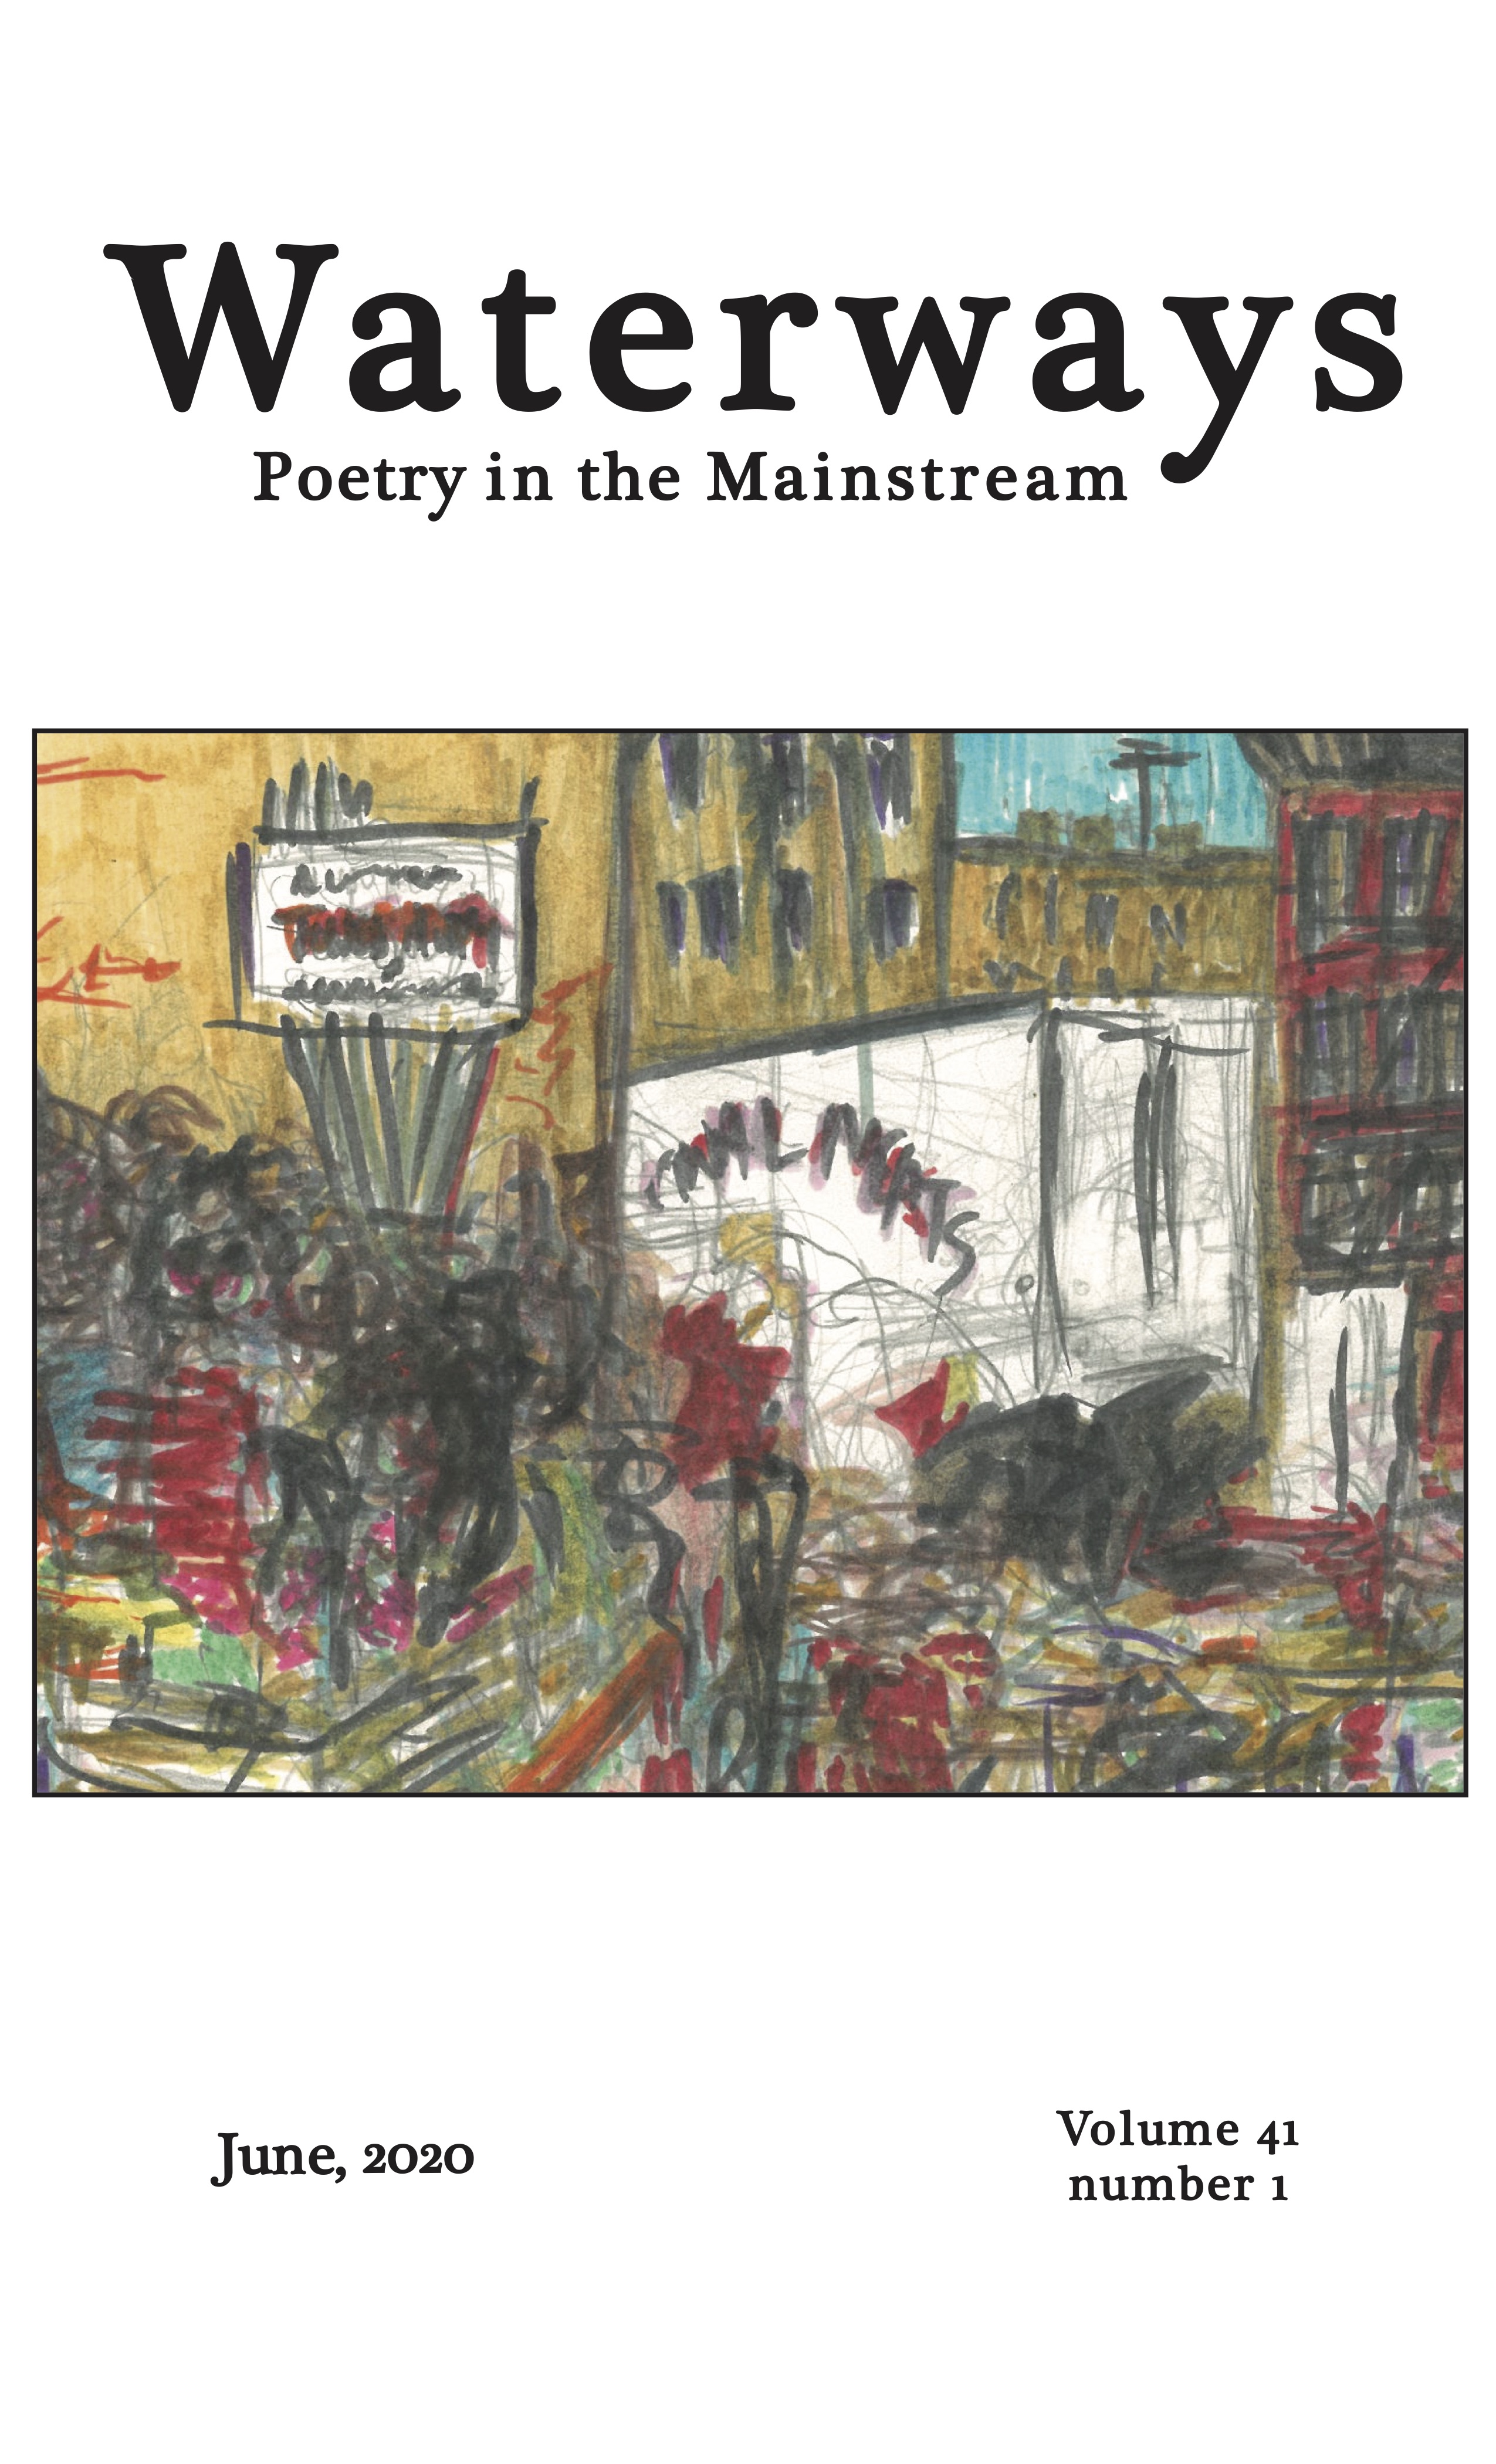 Cover of June 2019 features semi abstract pastel sketch of city scene including trucks, signs, and aparment buildings.